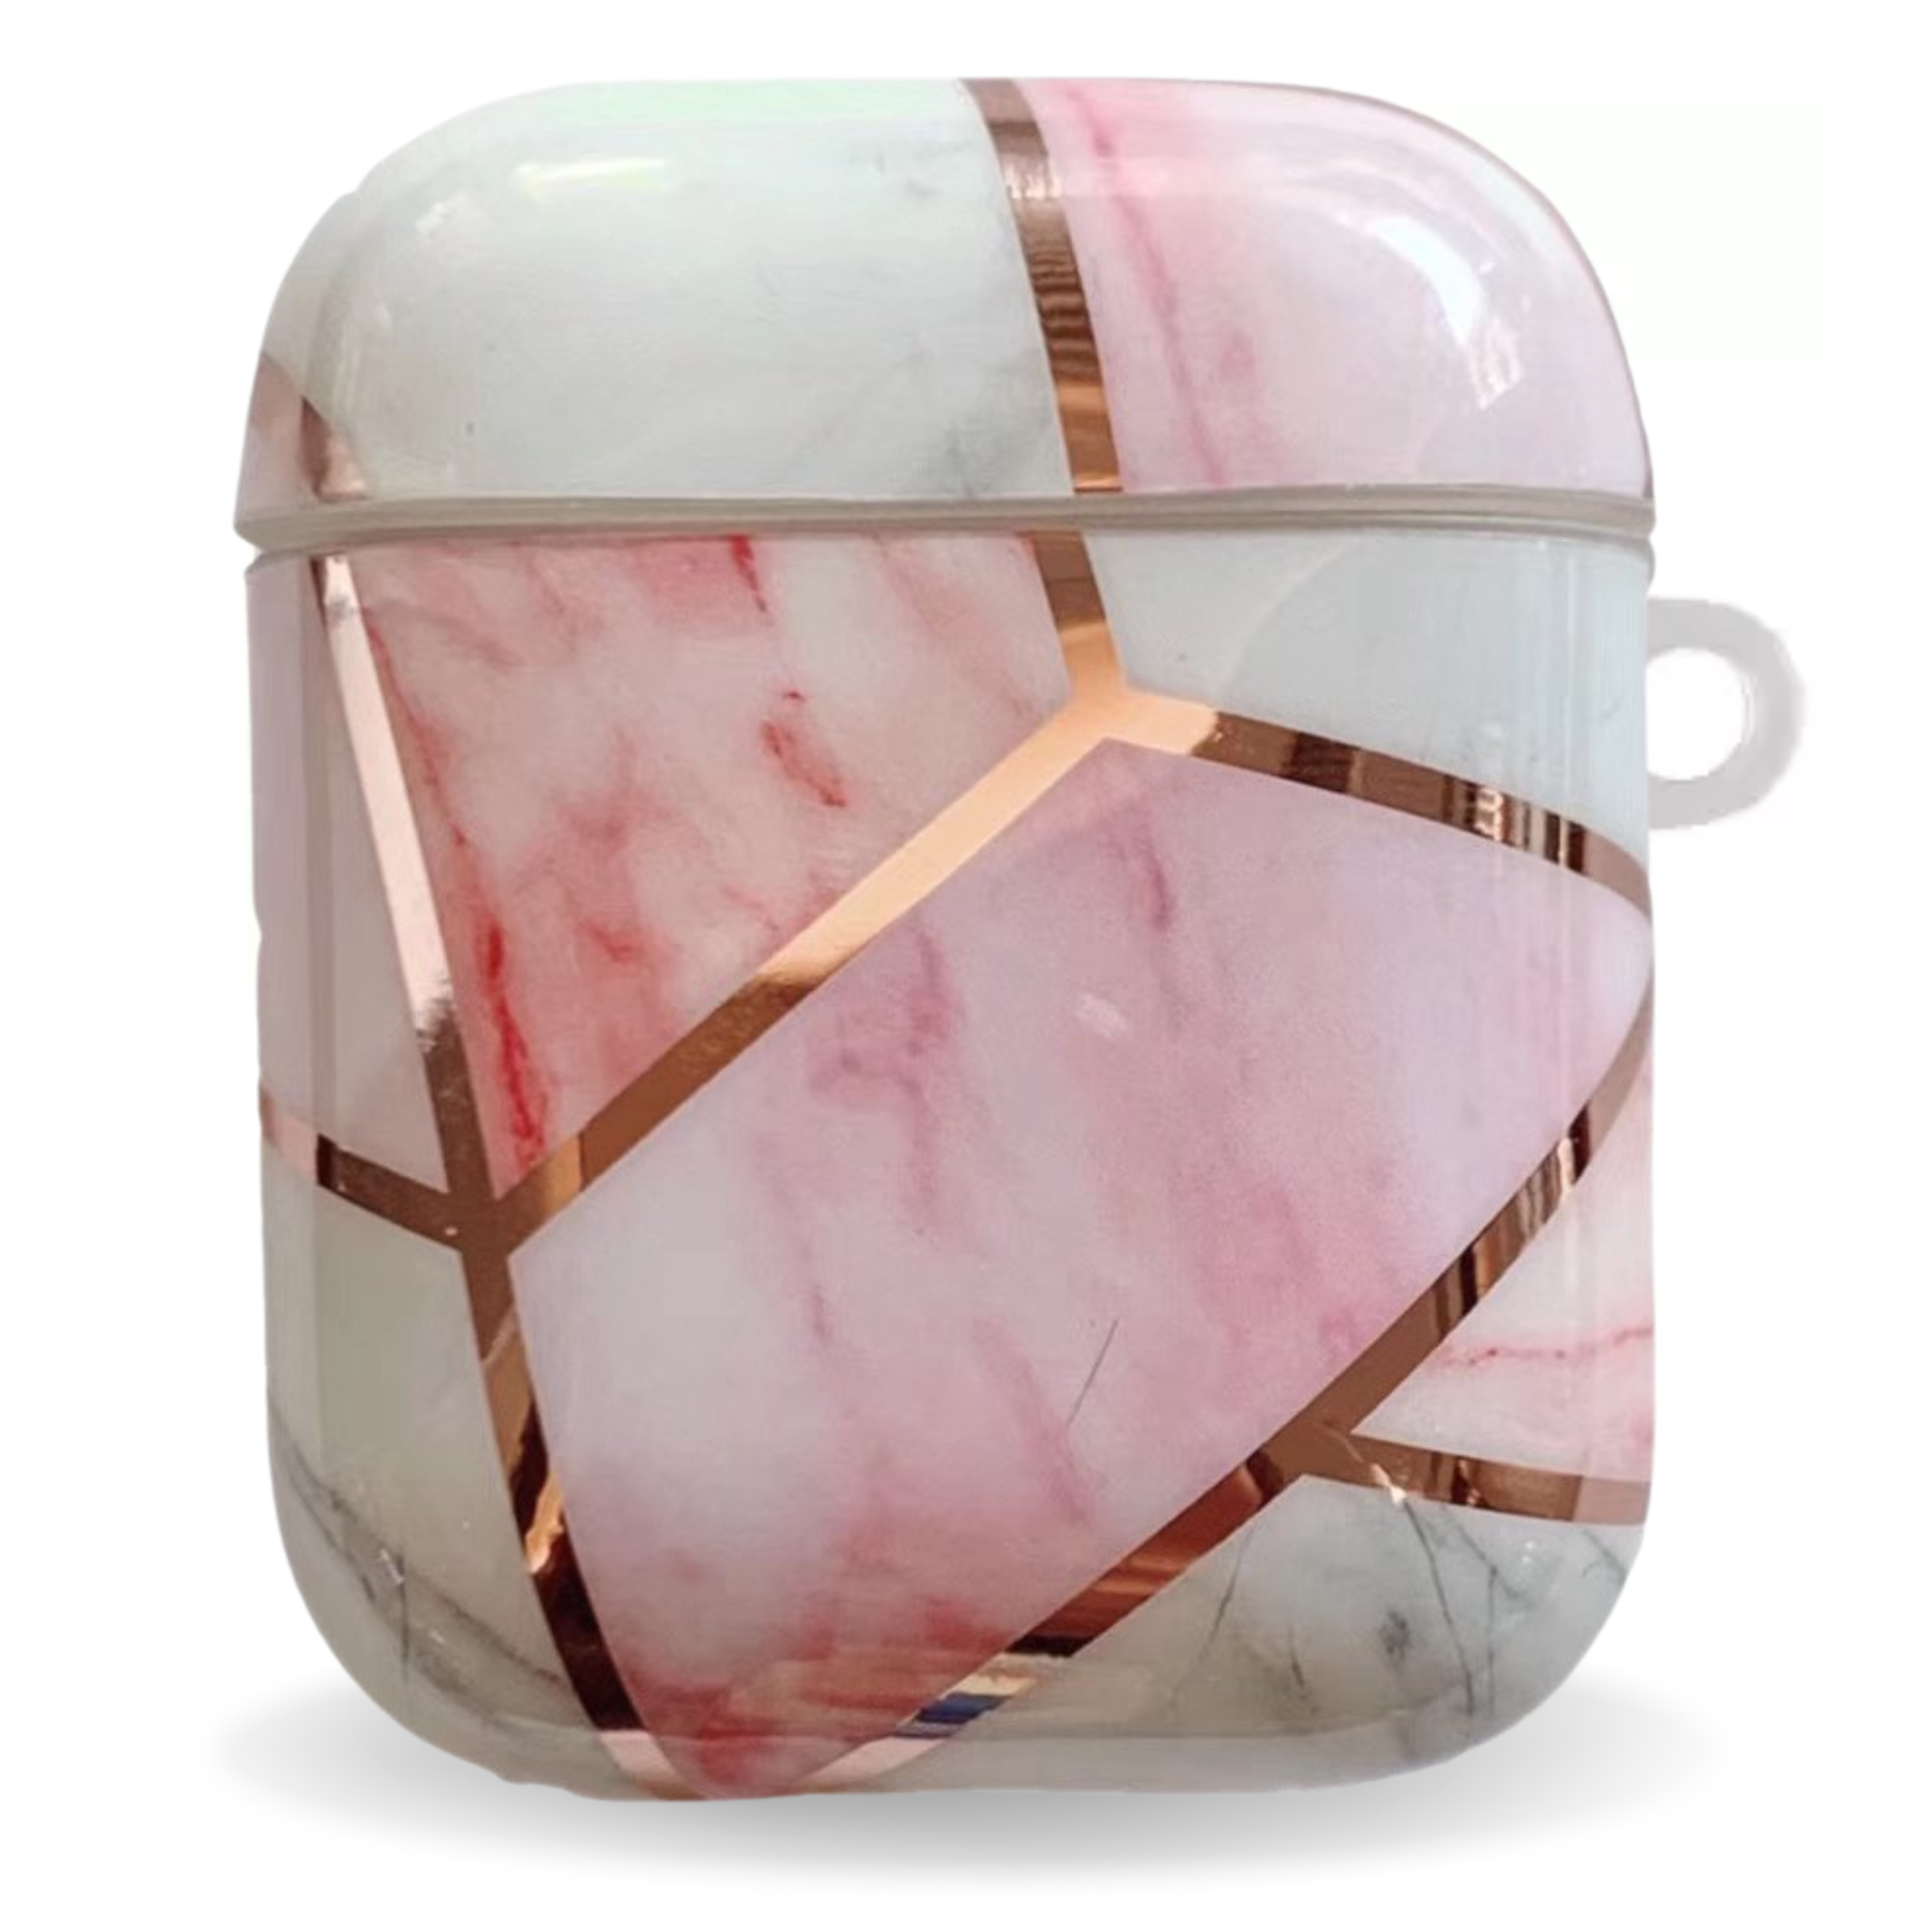 Airpod Case For Apple Airpods Gen 1 & 2 - Cute Geometric Art Marble Design Protective Silicone Cover With Keychain Slot- Supports Wireless Qi Charging For Airpods Generation 1 2 - Rose Pink Marble